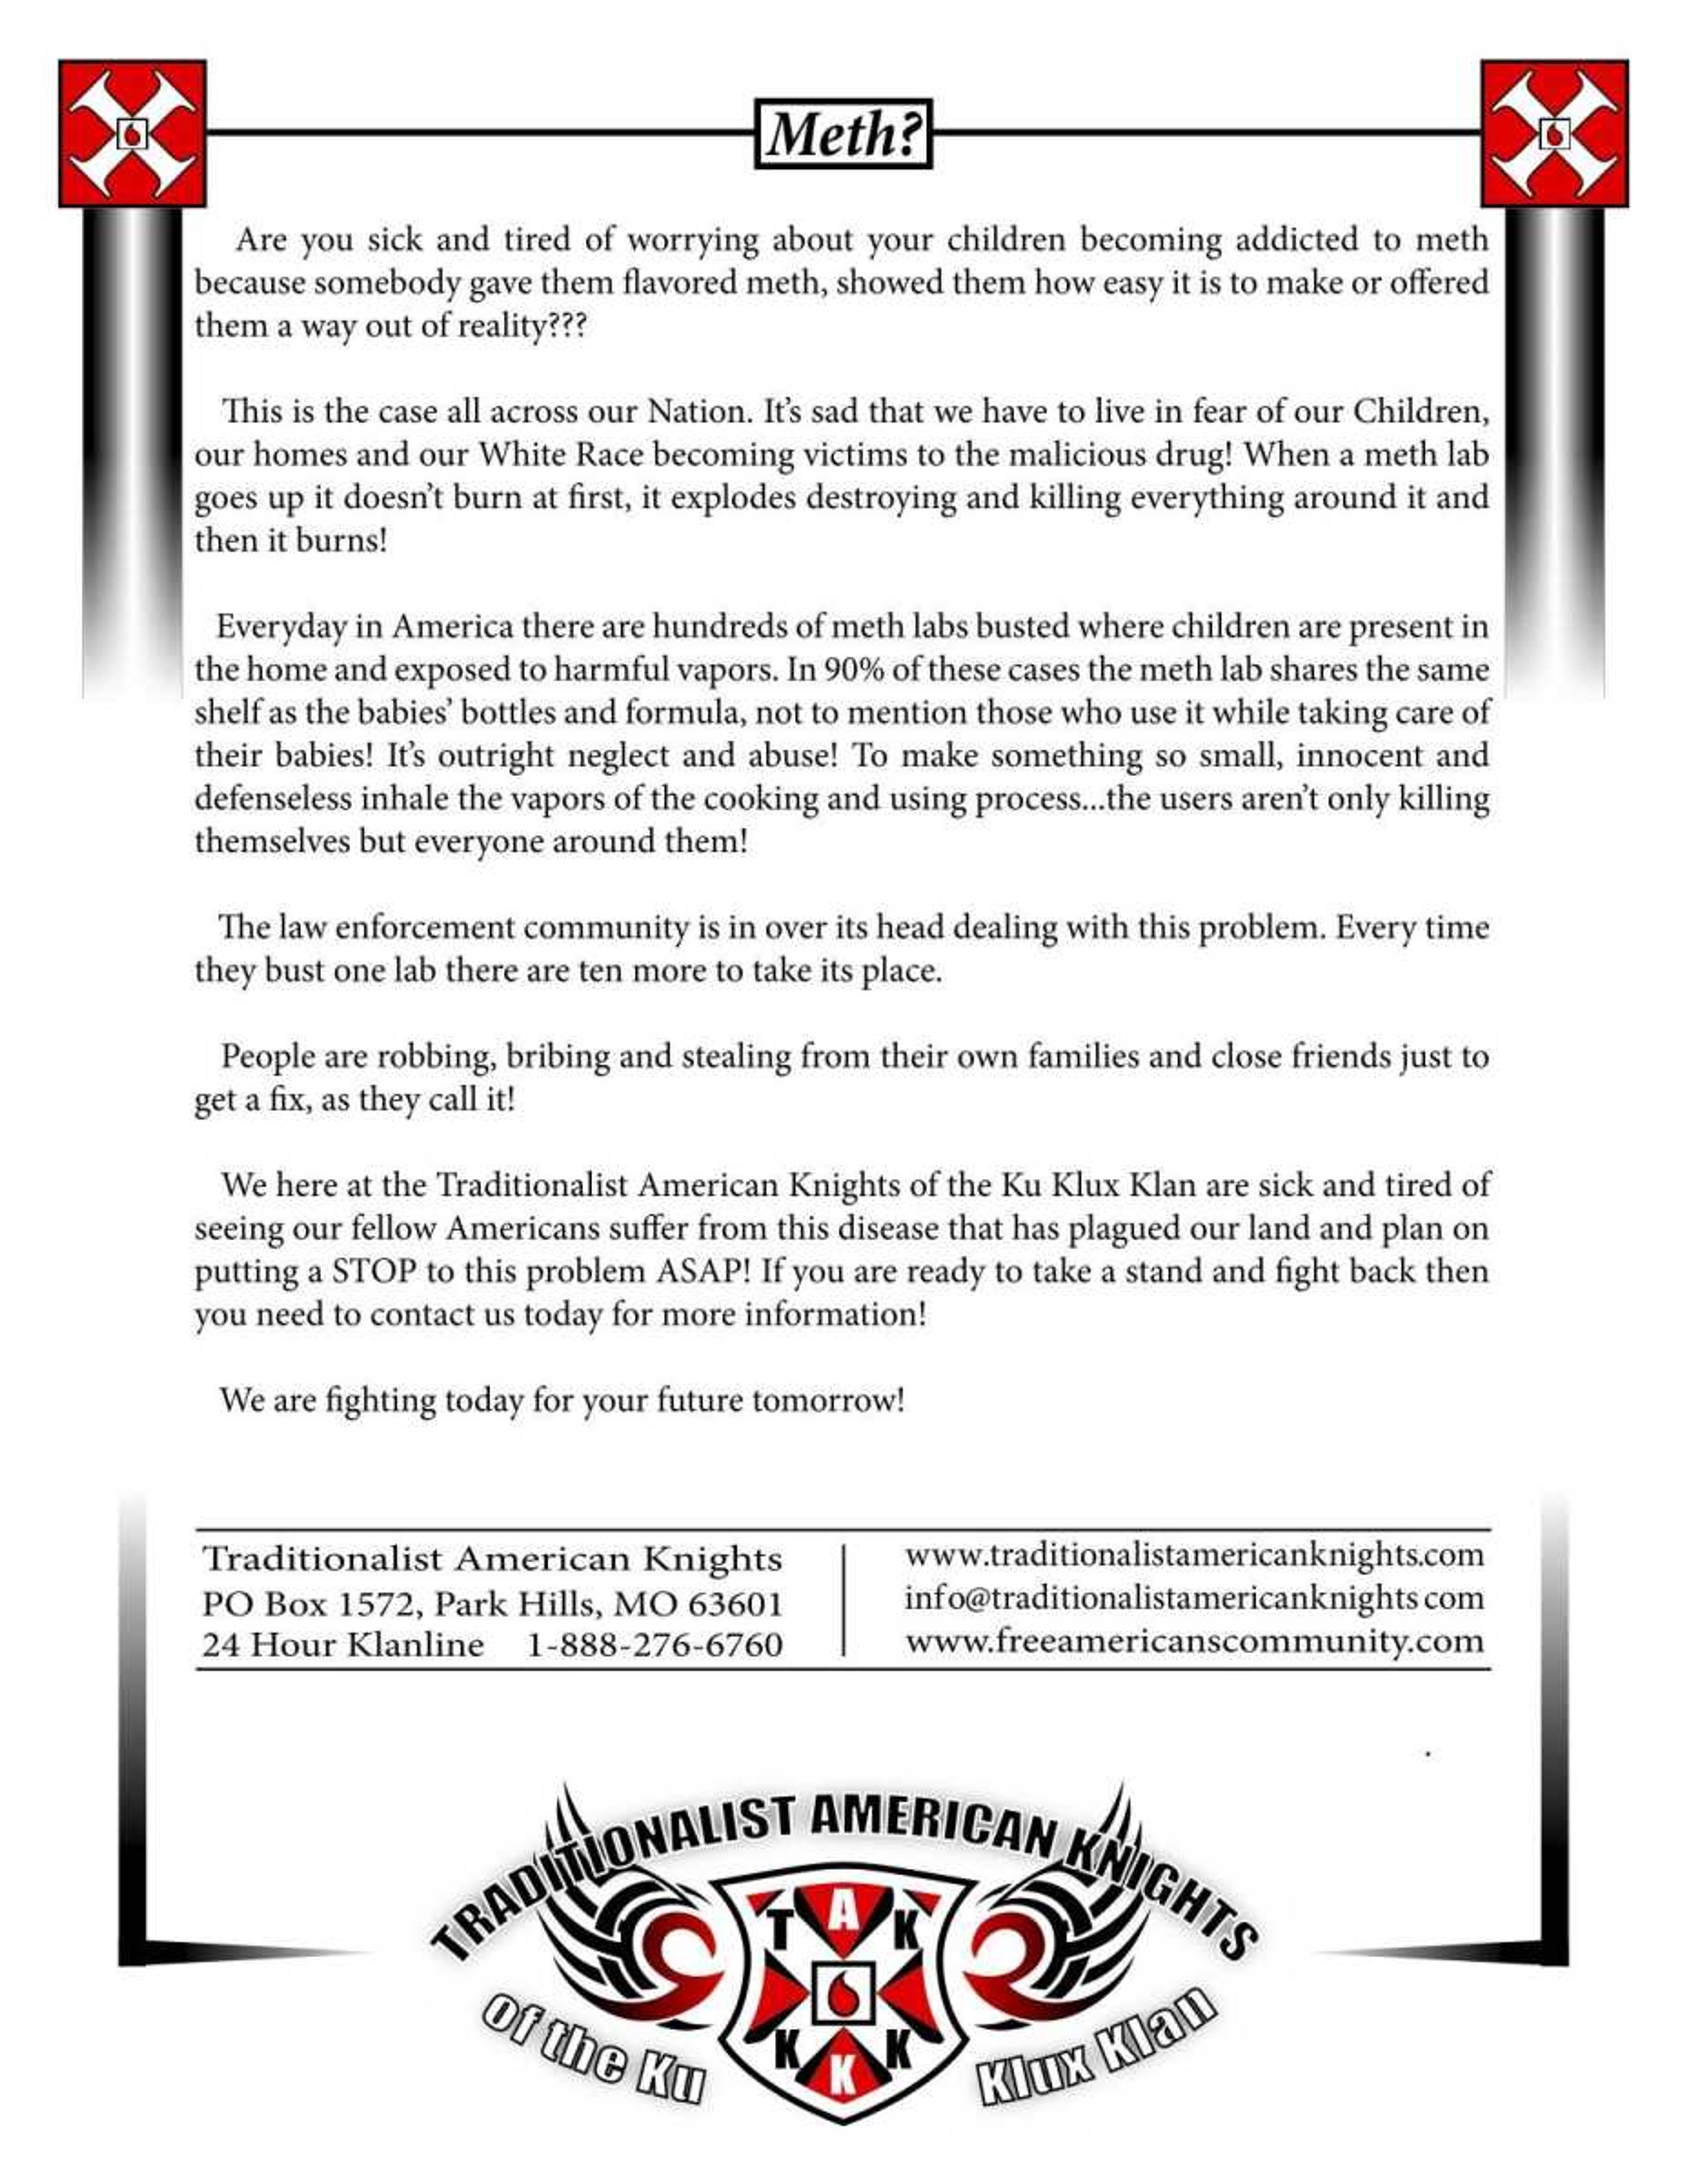 An example of a Traditionalist American Knights flier taken from the organization's website.